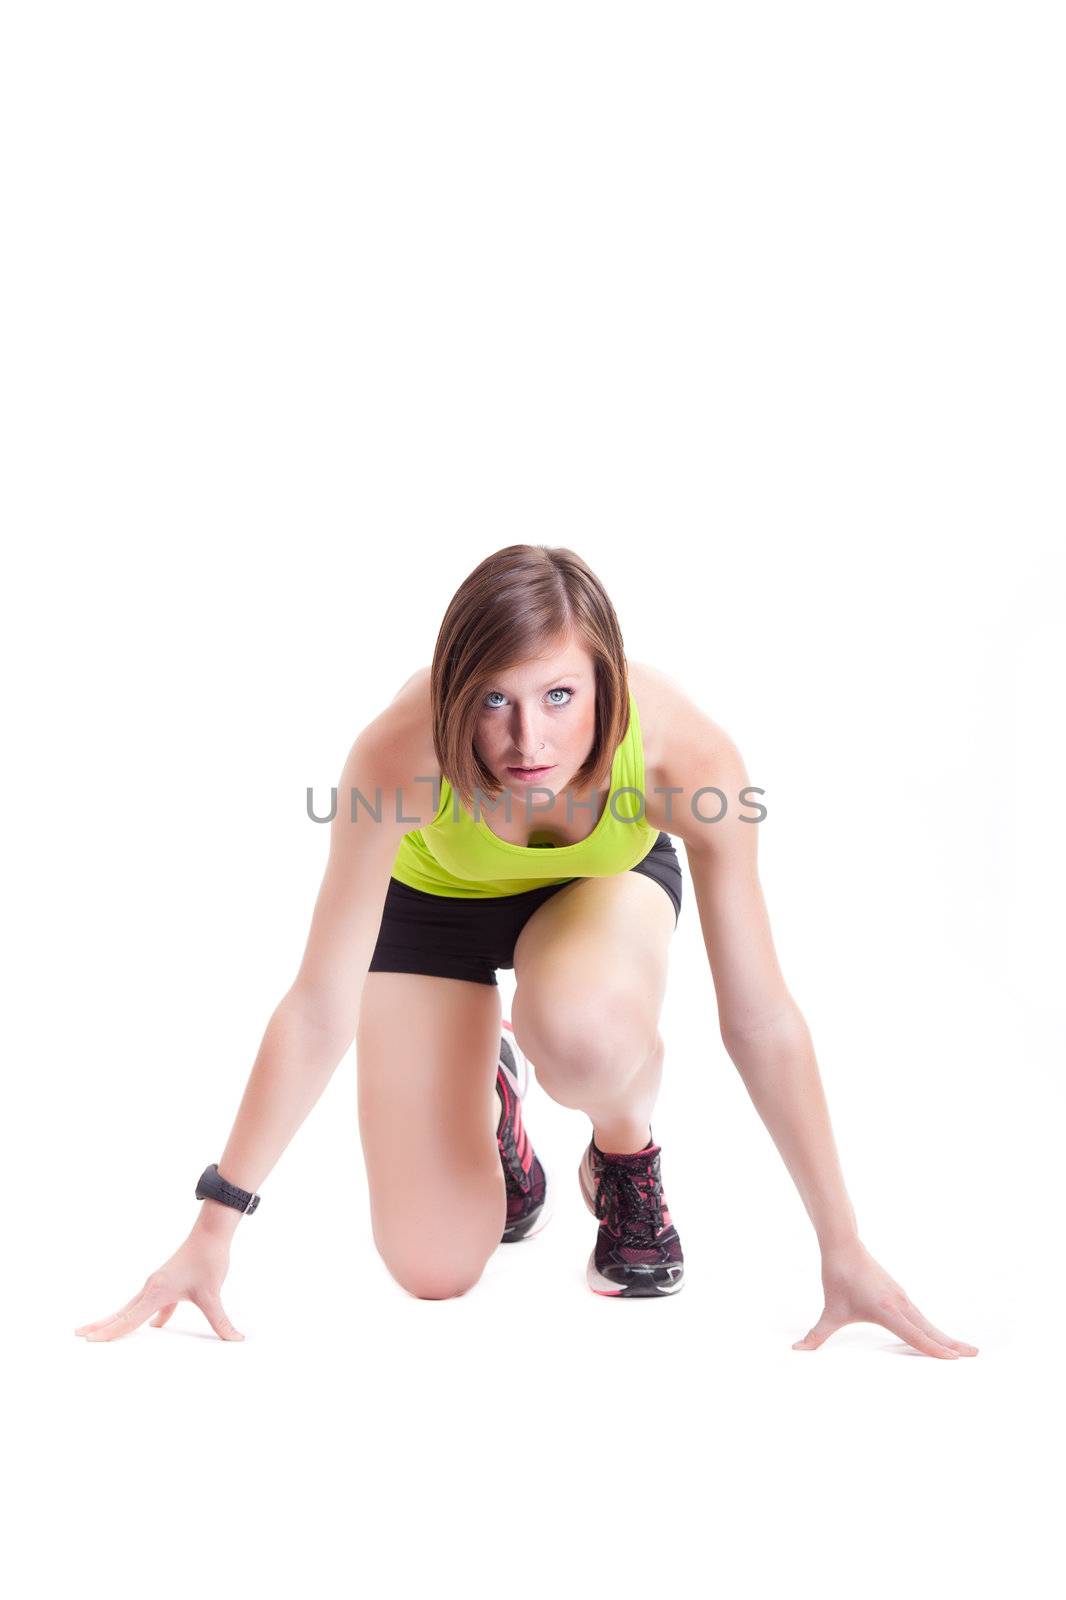 young beautiful sport woman ready for a race by Lcrespi